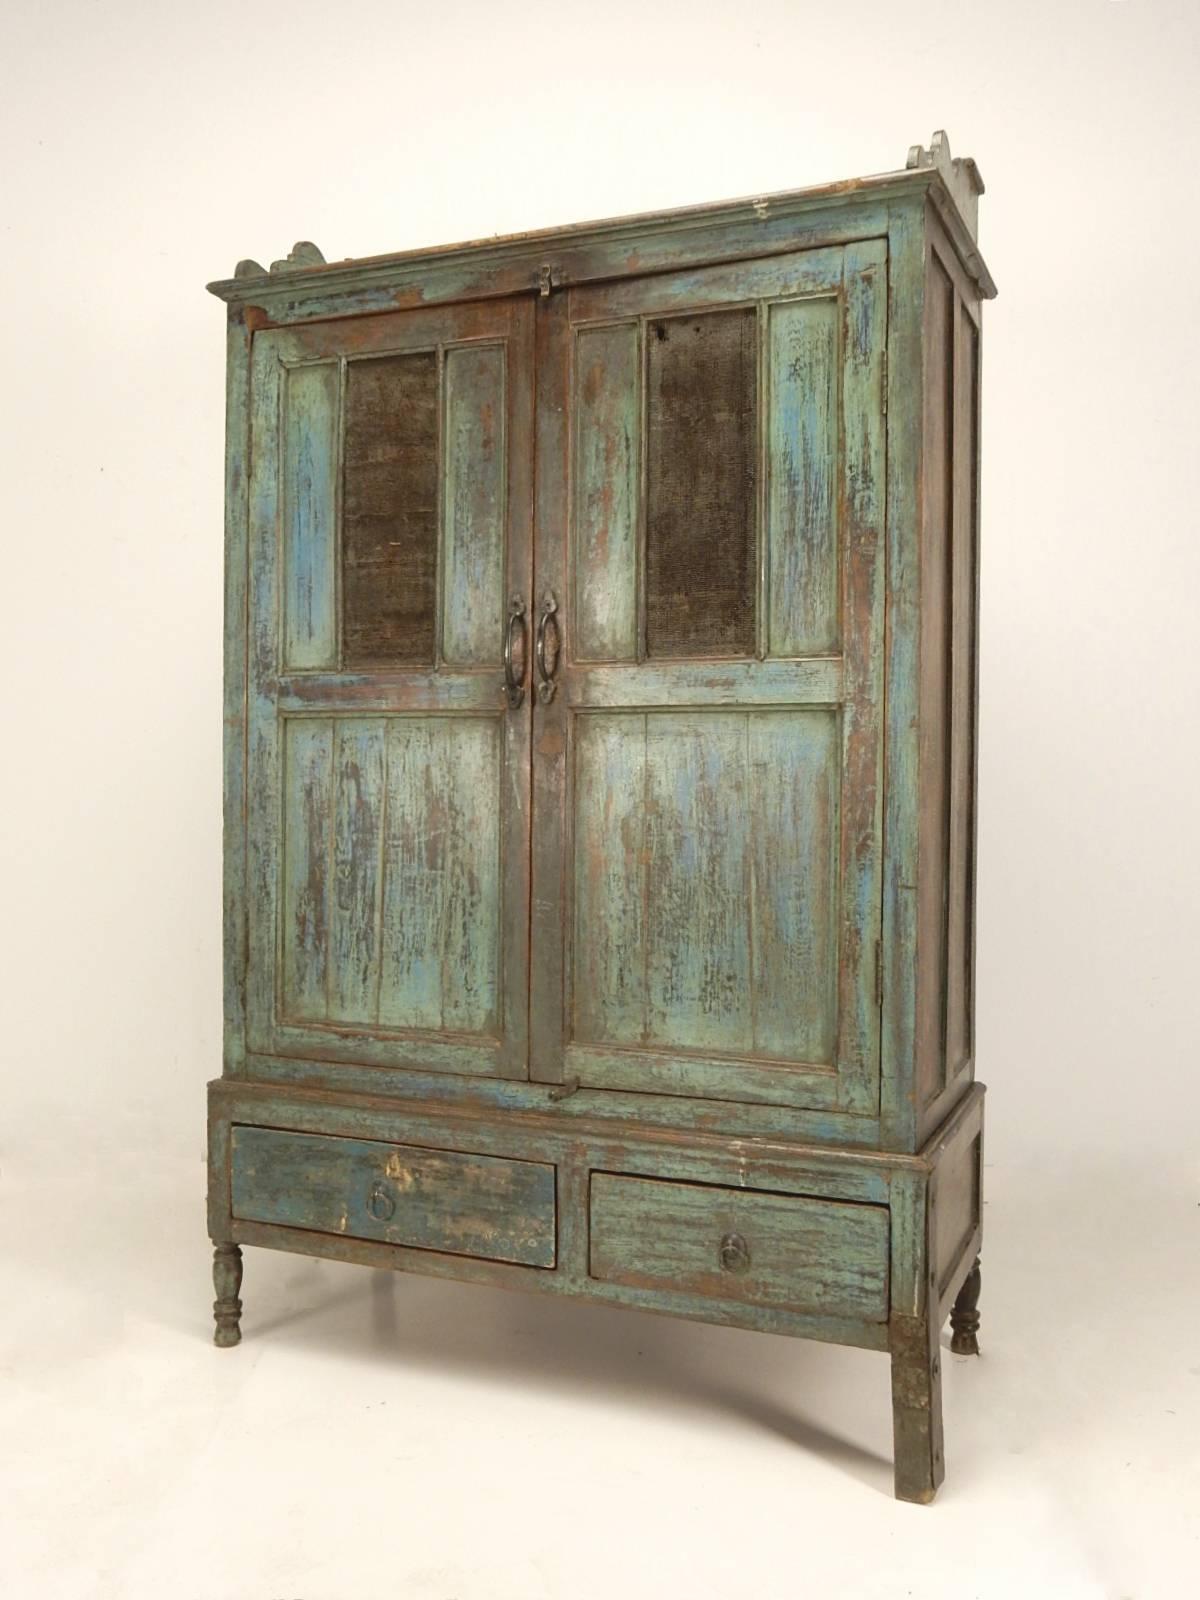 Primitive painted pie safe cabinet, circa 1890s.
Striking multi layer paint on face. Double cabinet top with double drawer base.
Screen panels on each cabinet door.
Two-piece separating at drawer base. Ancient front right leg repair is